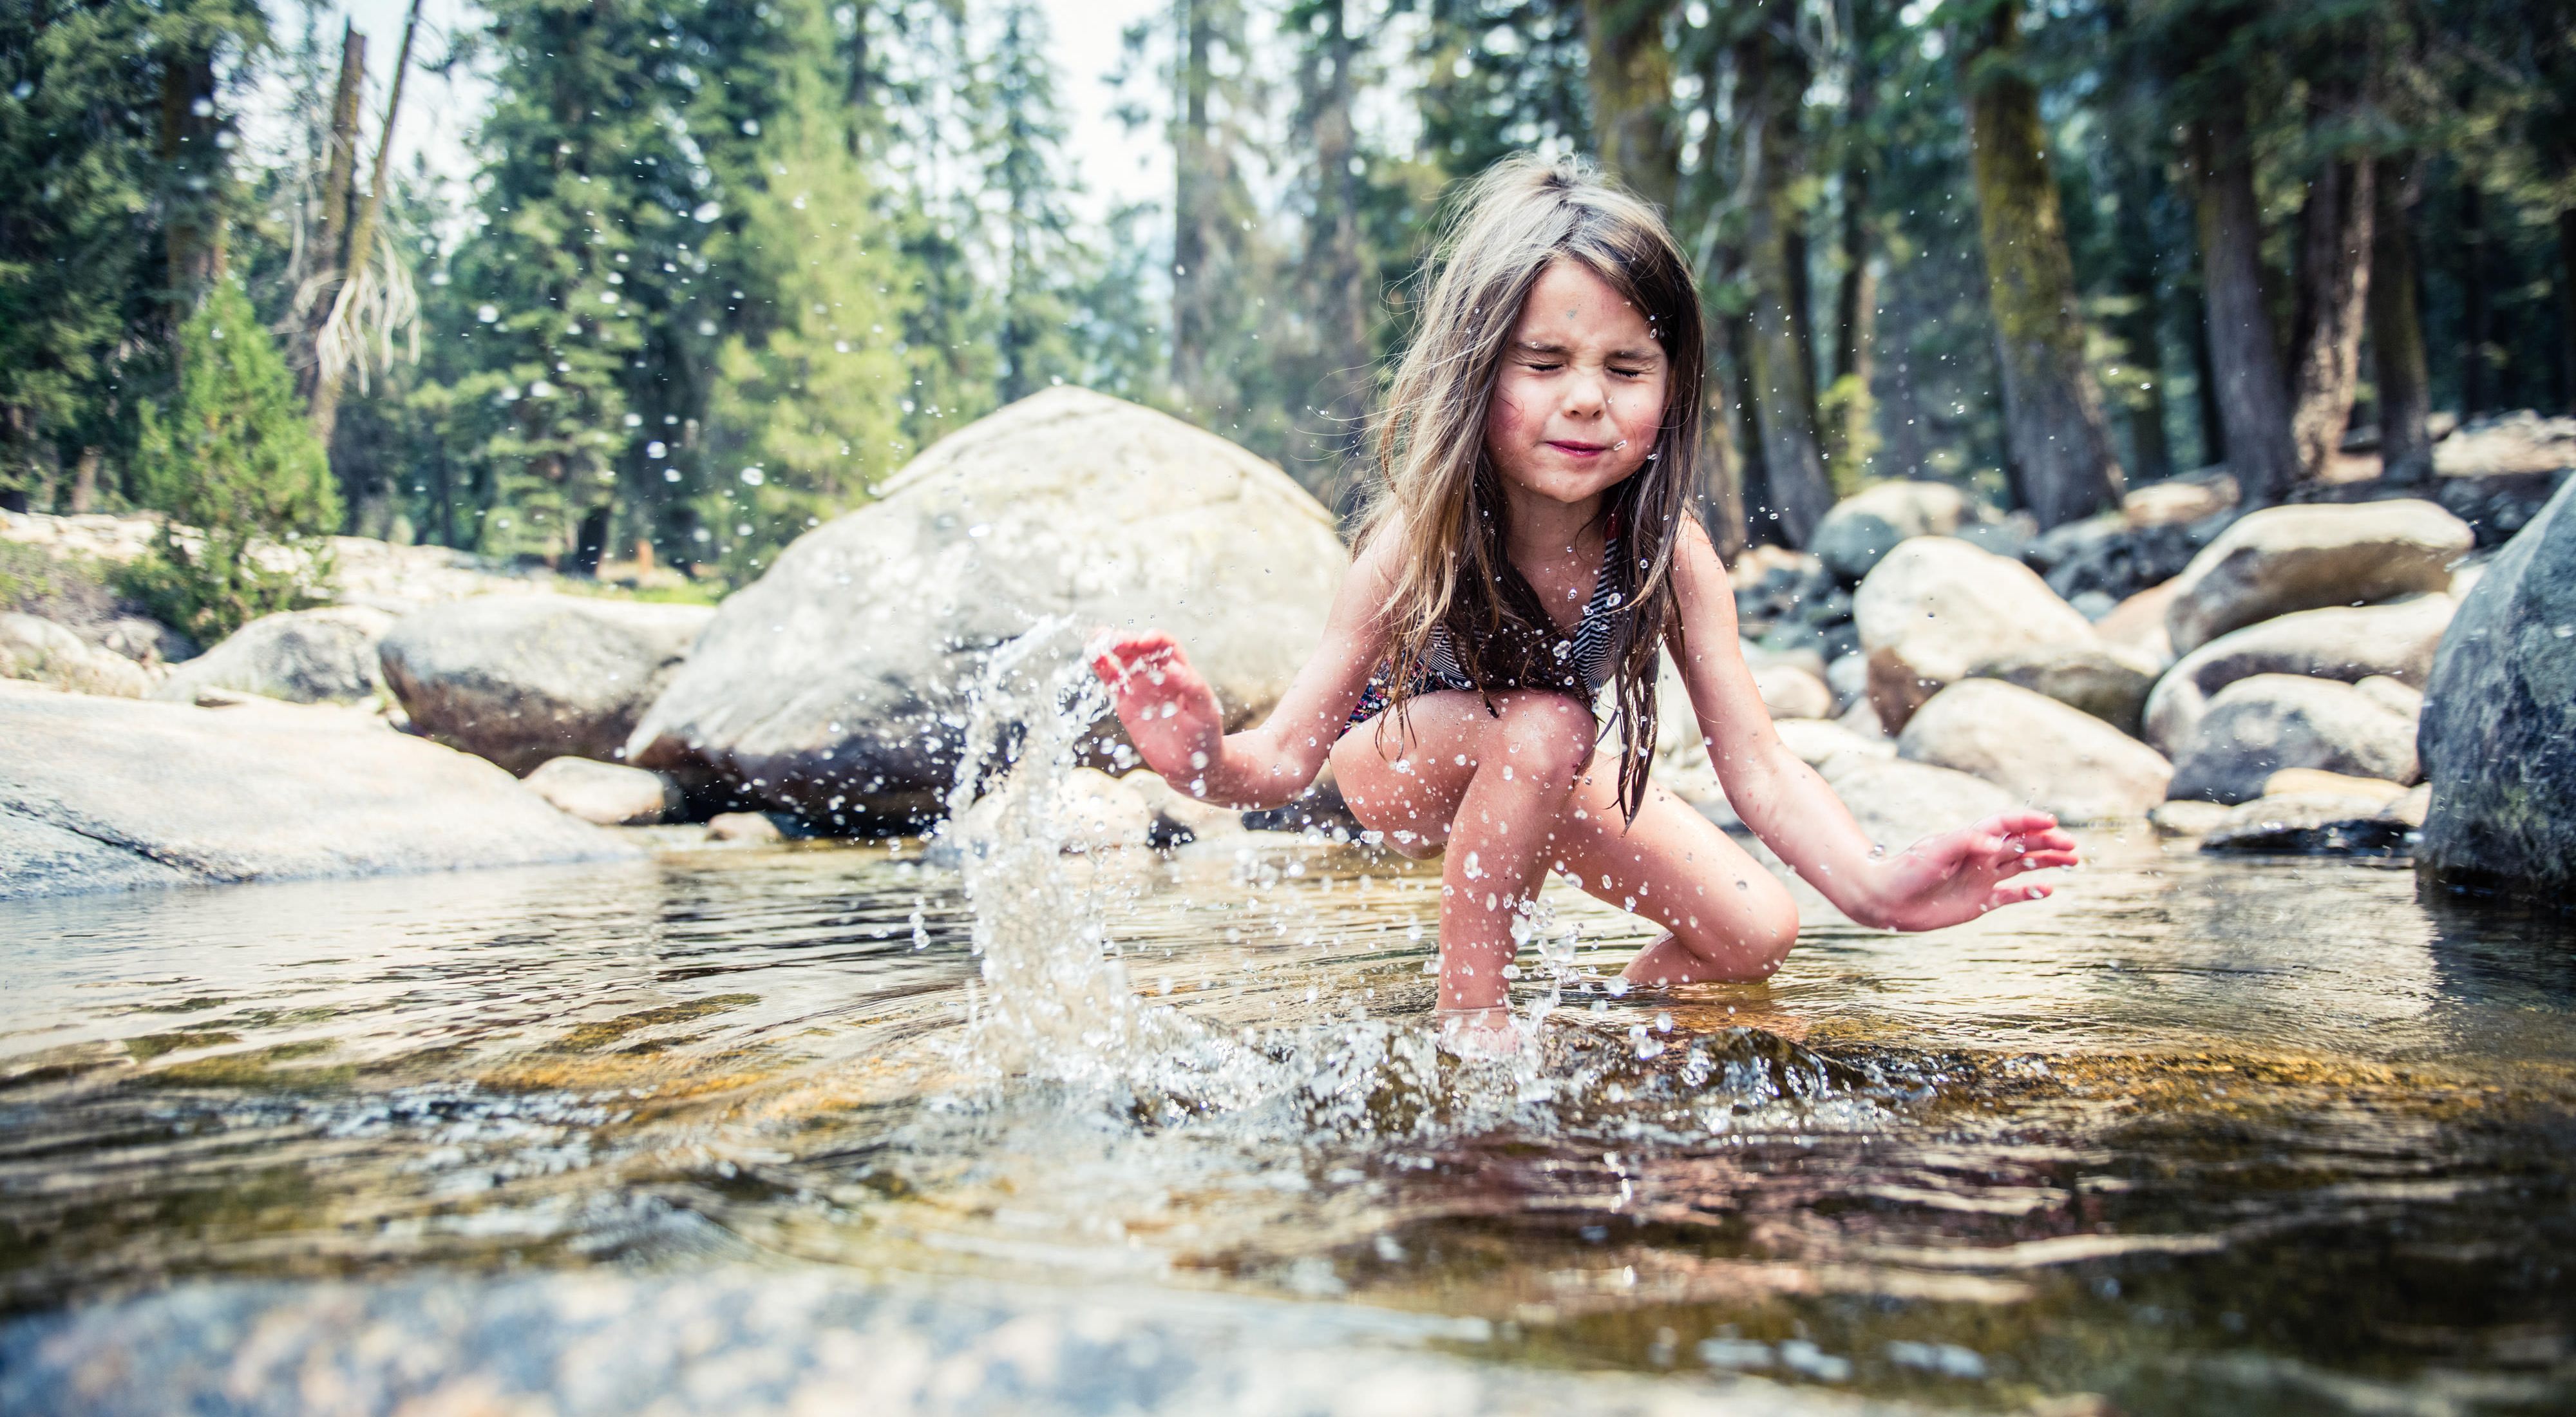 A girl splashes water in front of rocks.